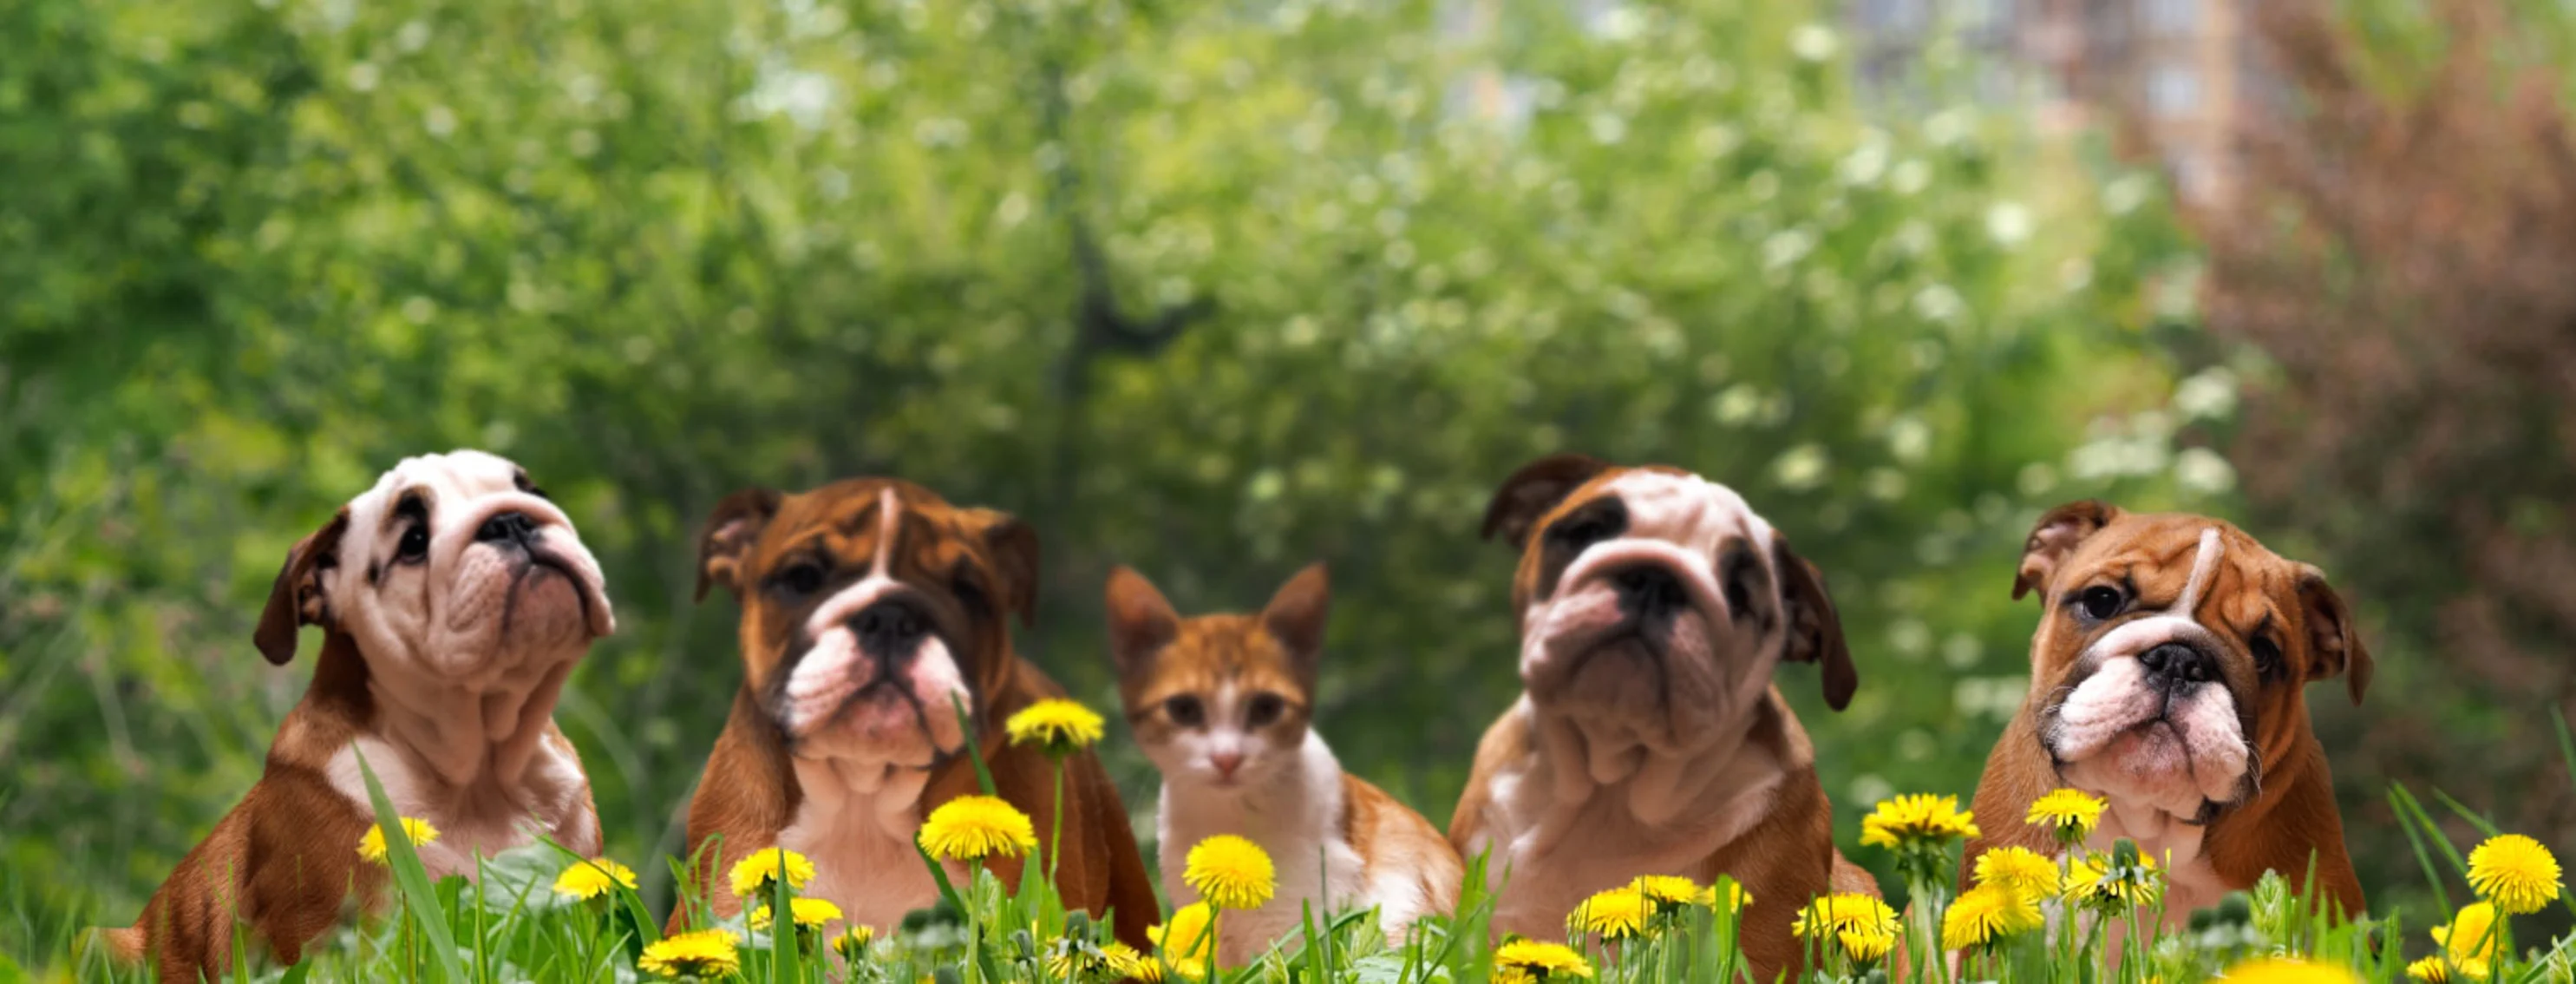 English bulldog puppies and cat sitting in field of yellow flowers